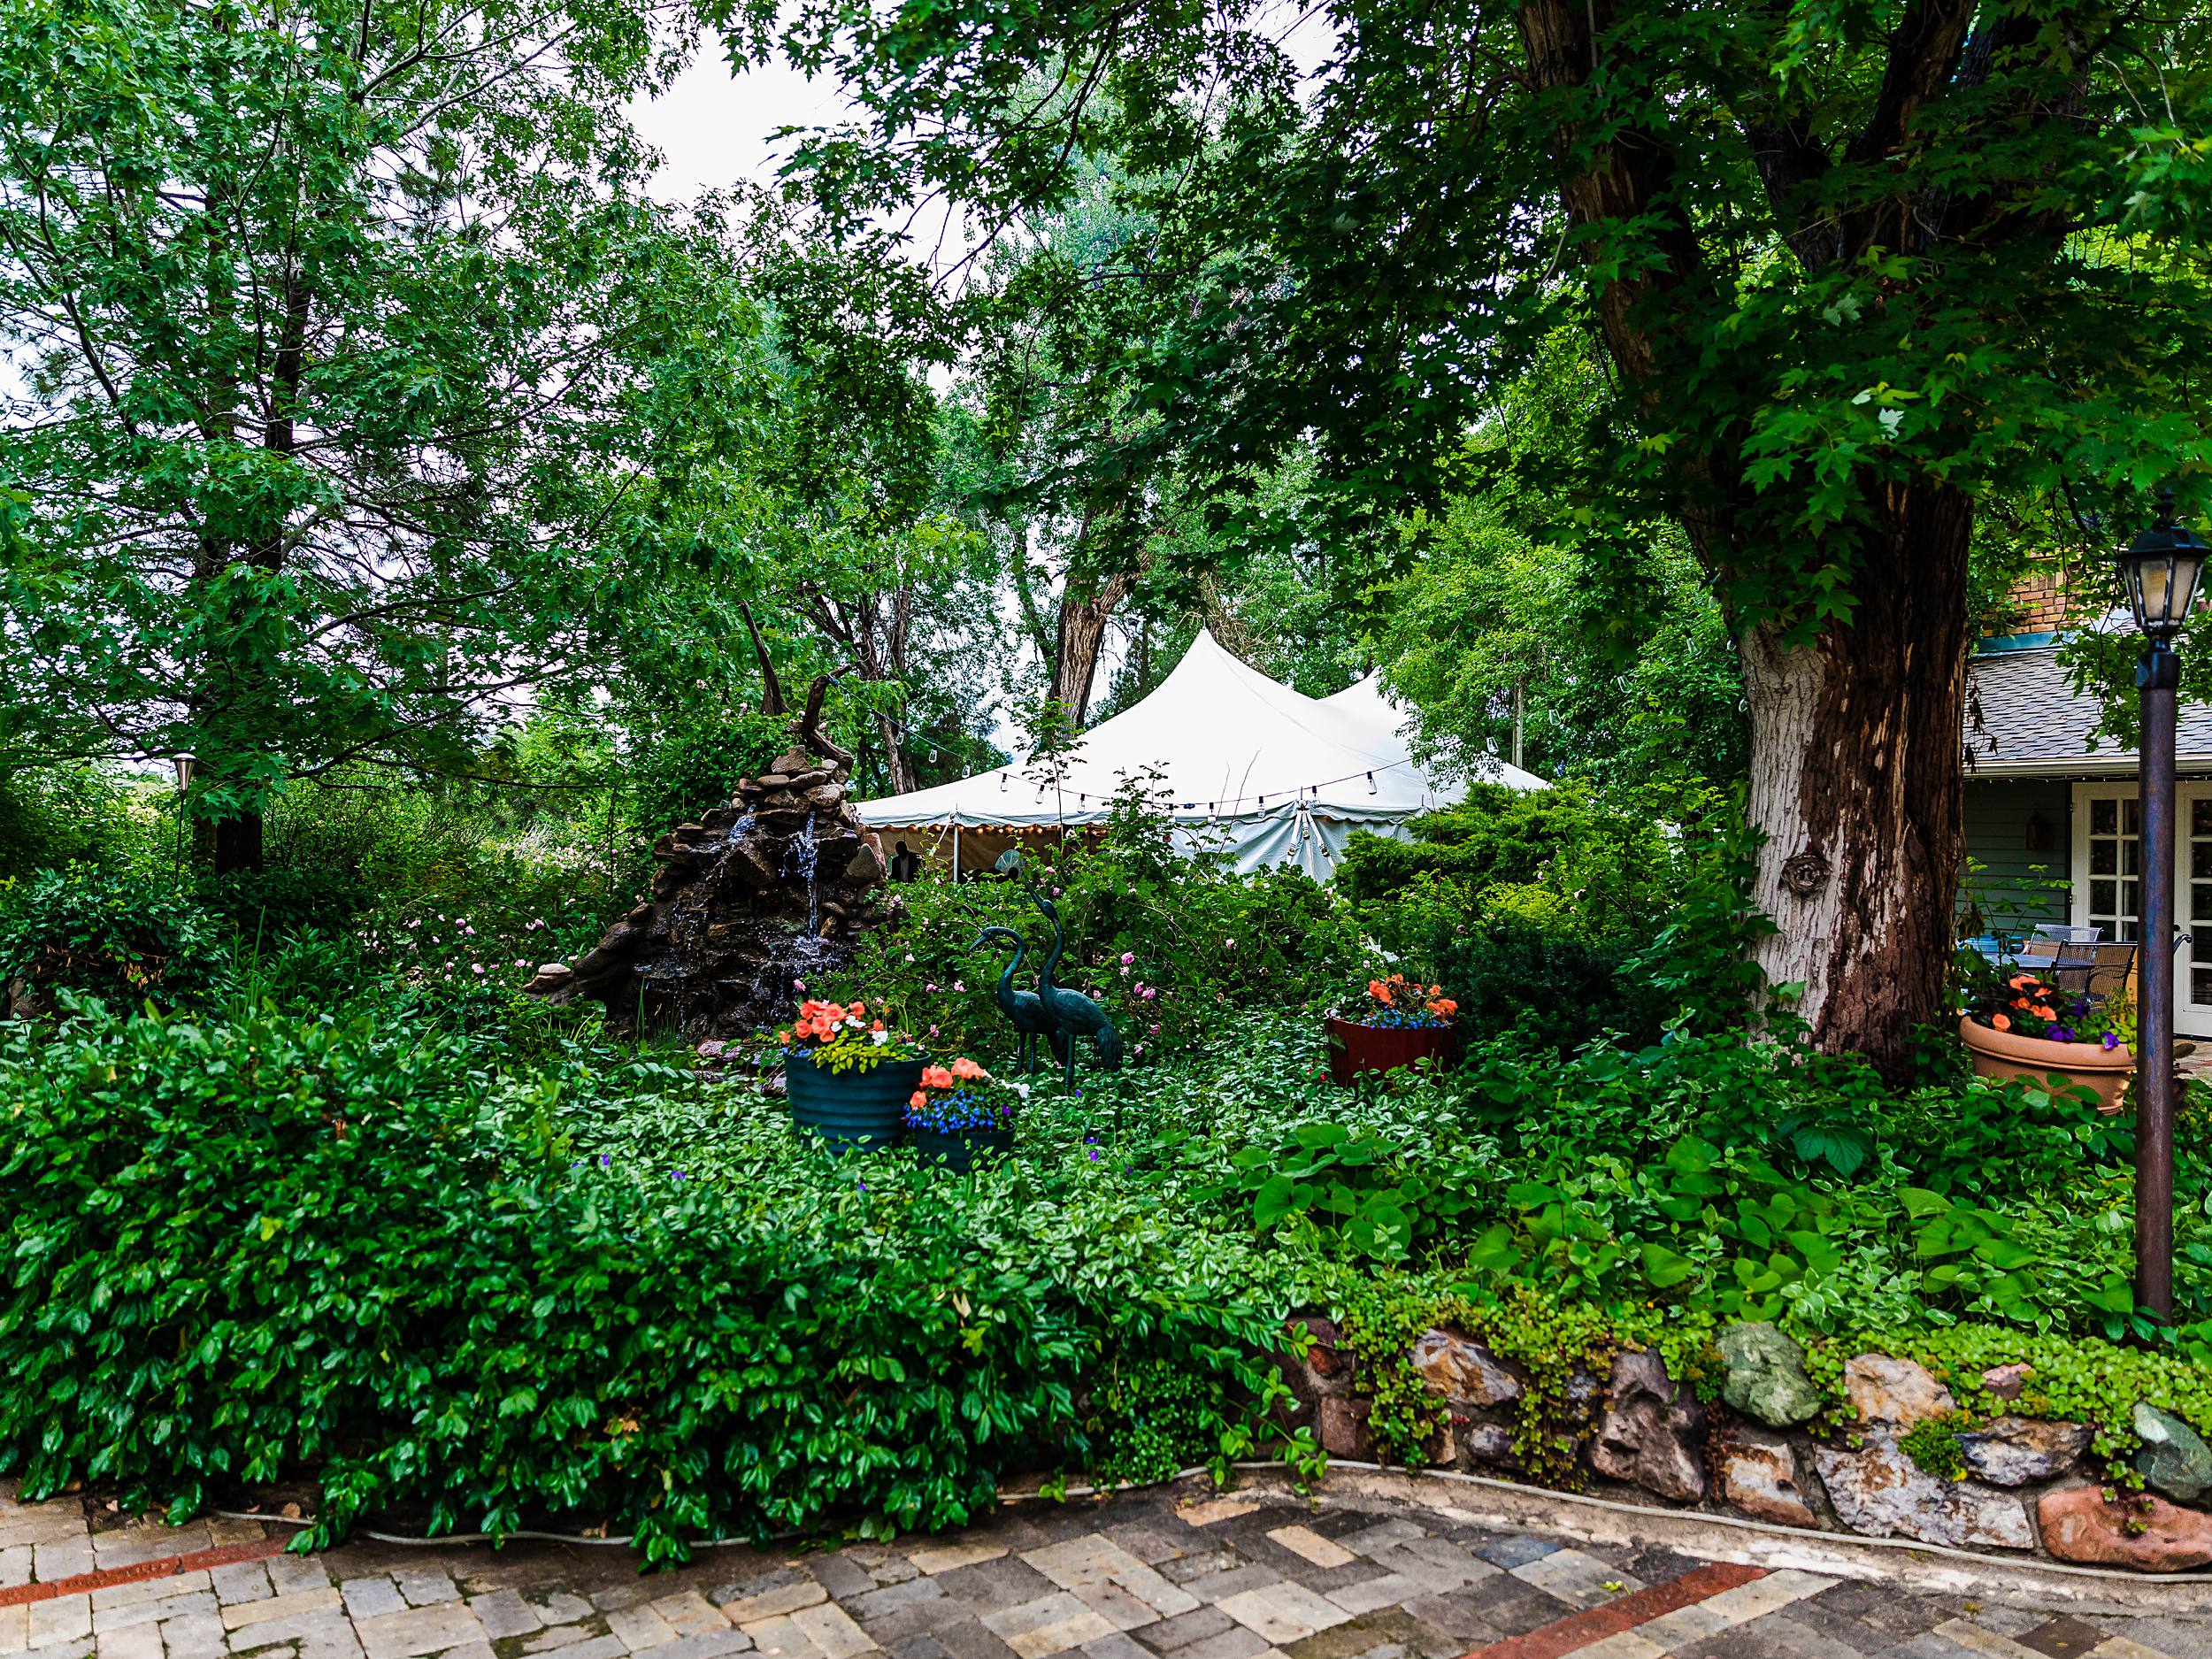 Haystack Hearth in Niwot, CO has a tranquil backyard feeling for your wedding.